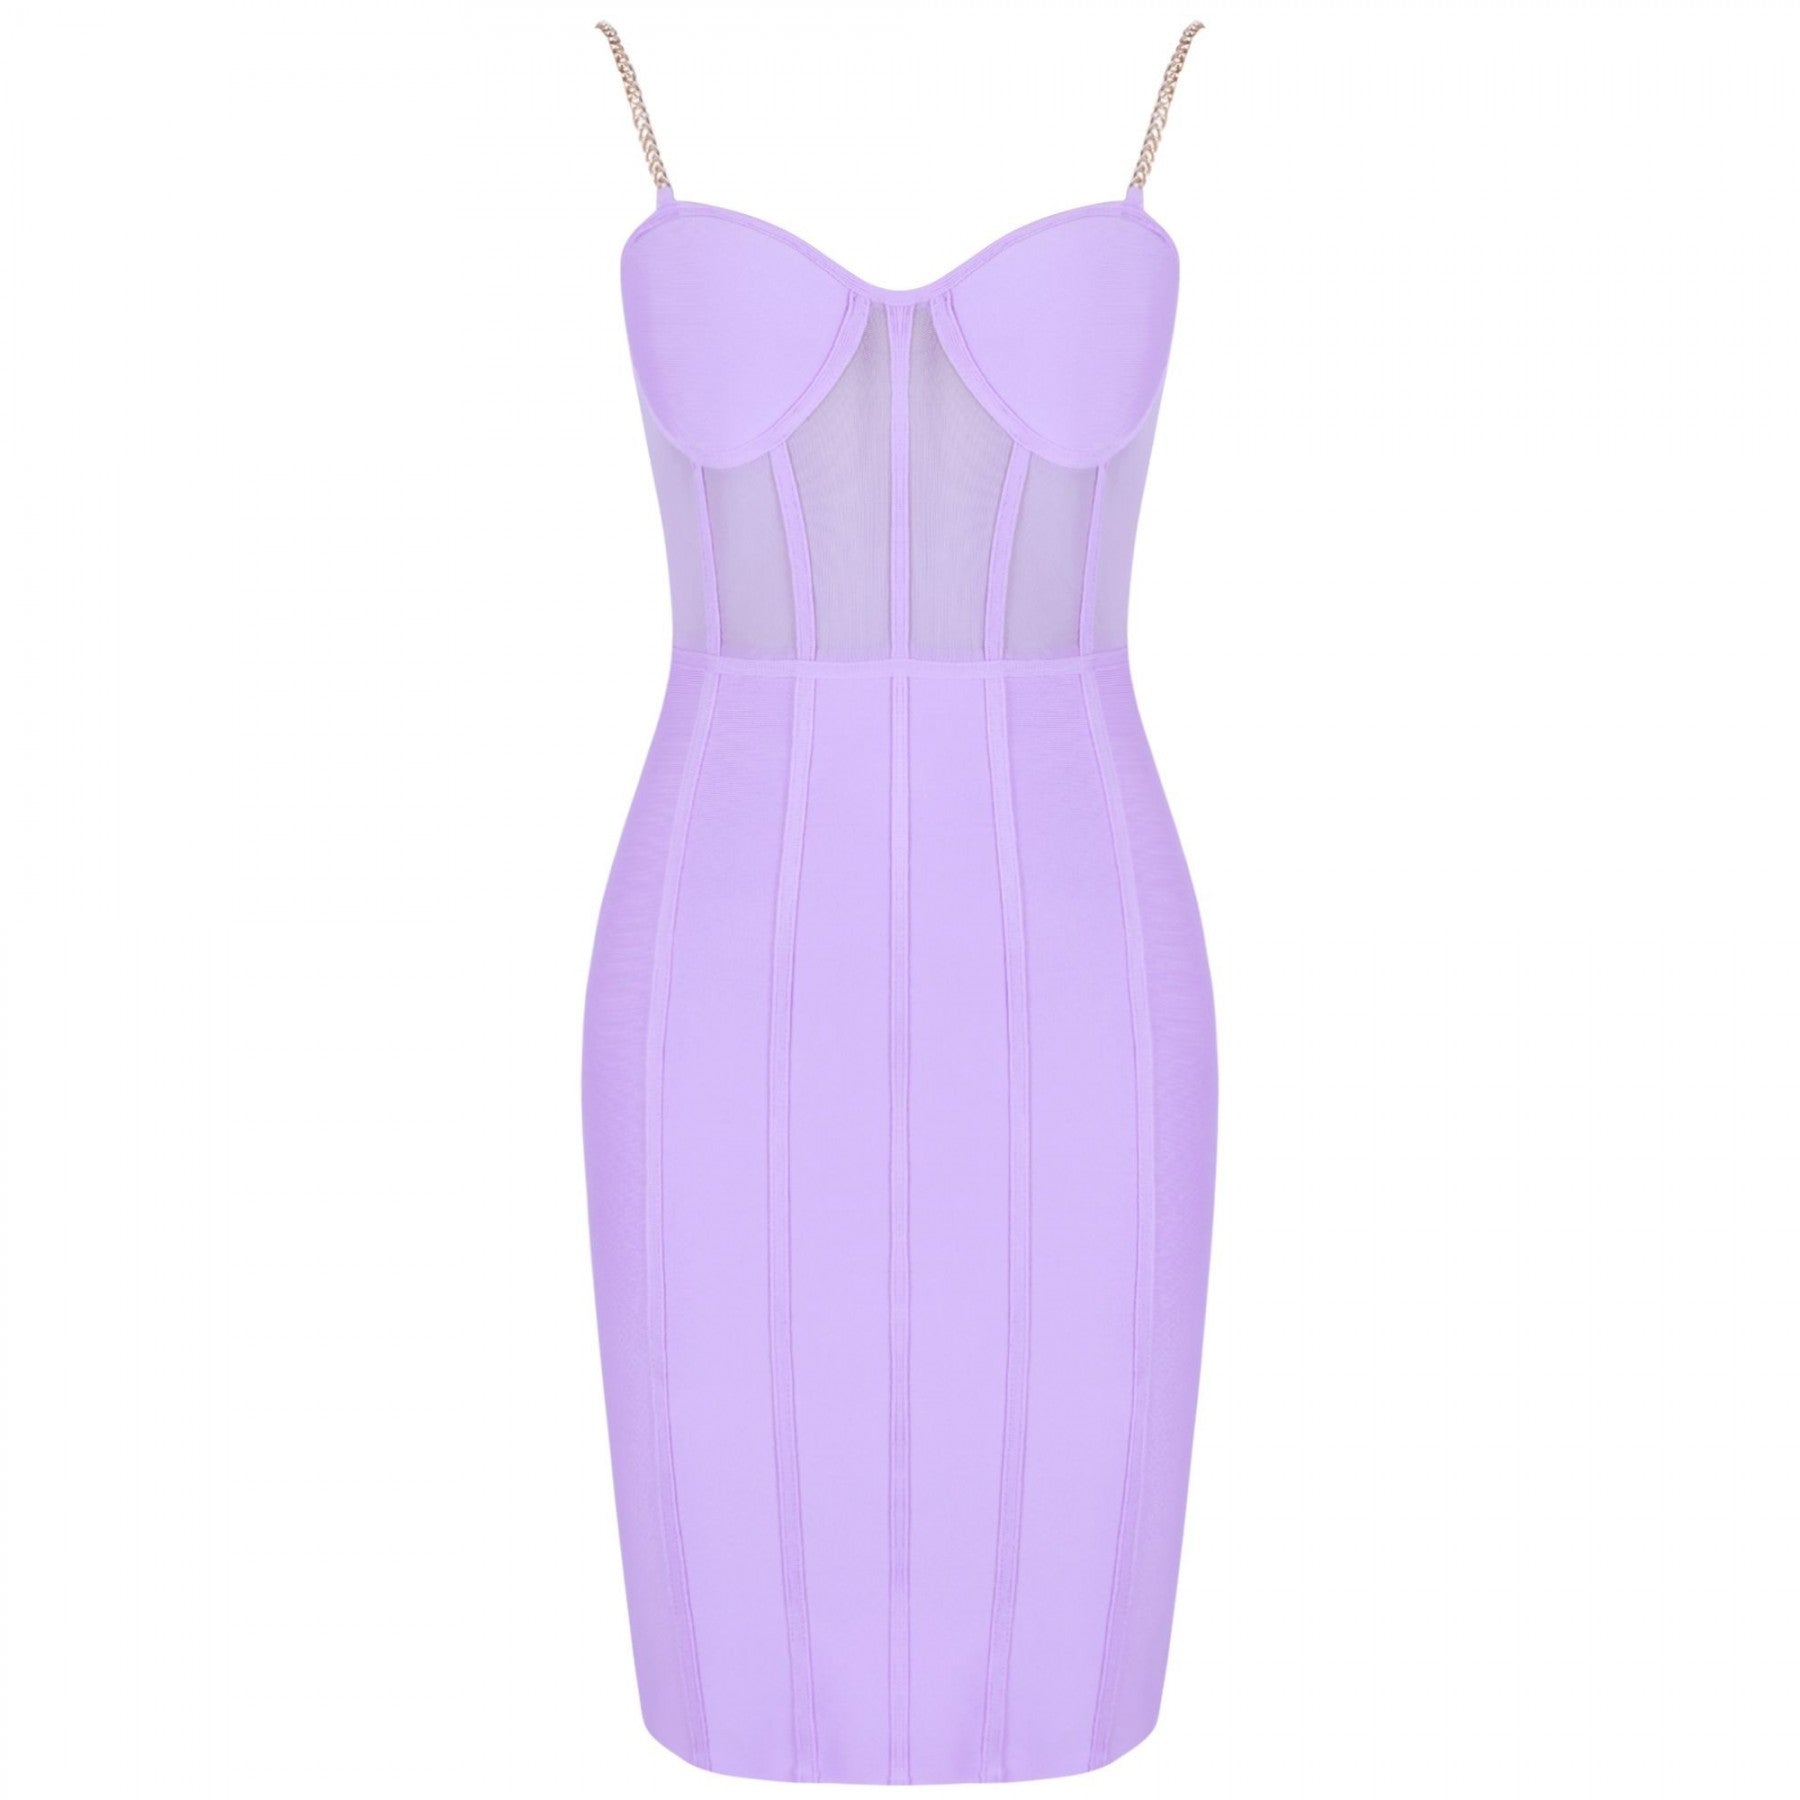 Strappy Sleeveless Striped Over Knee Bandage Dress PP19138 4 in wolddress